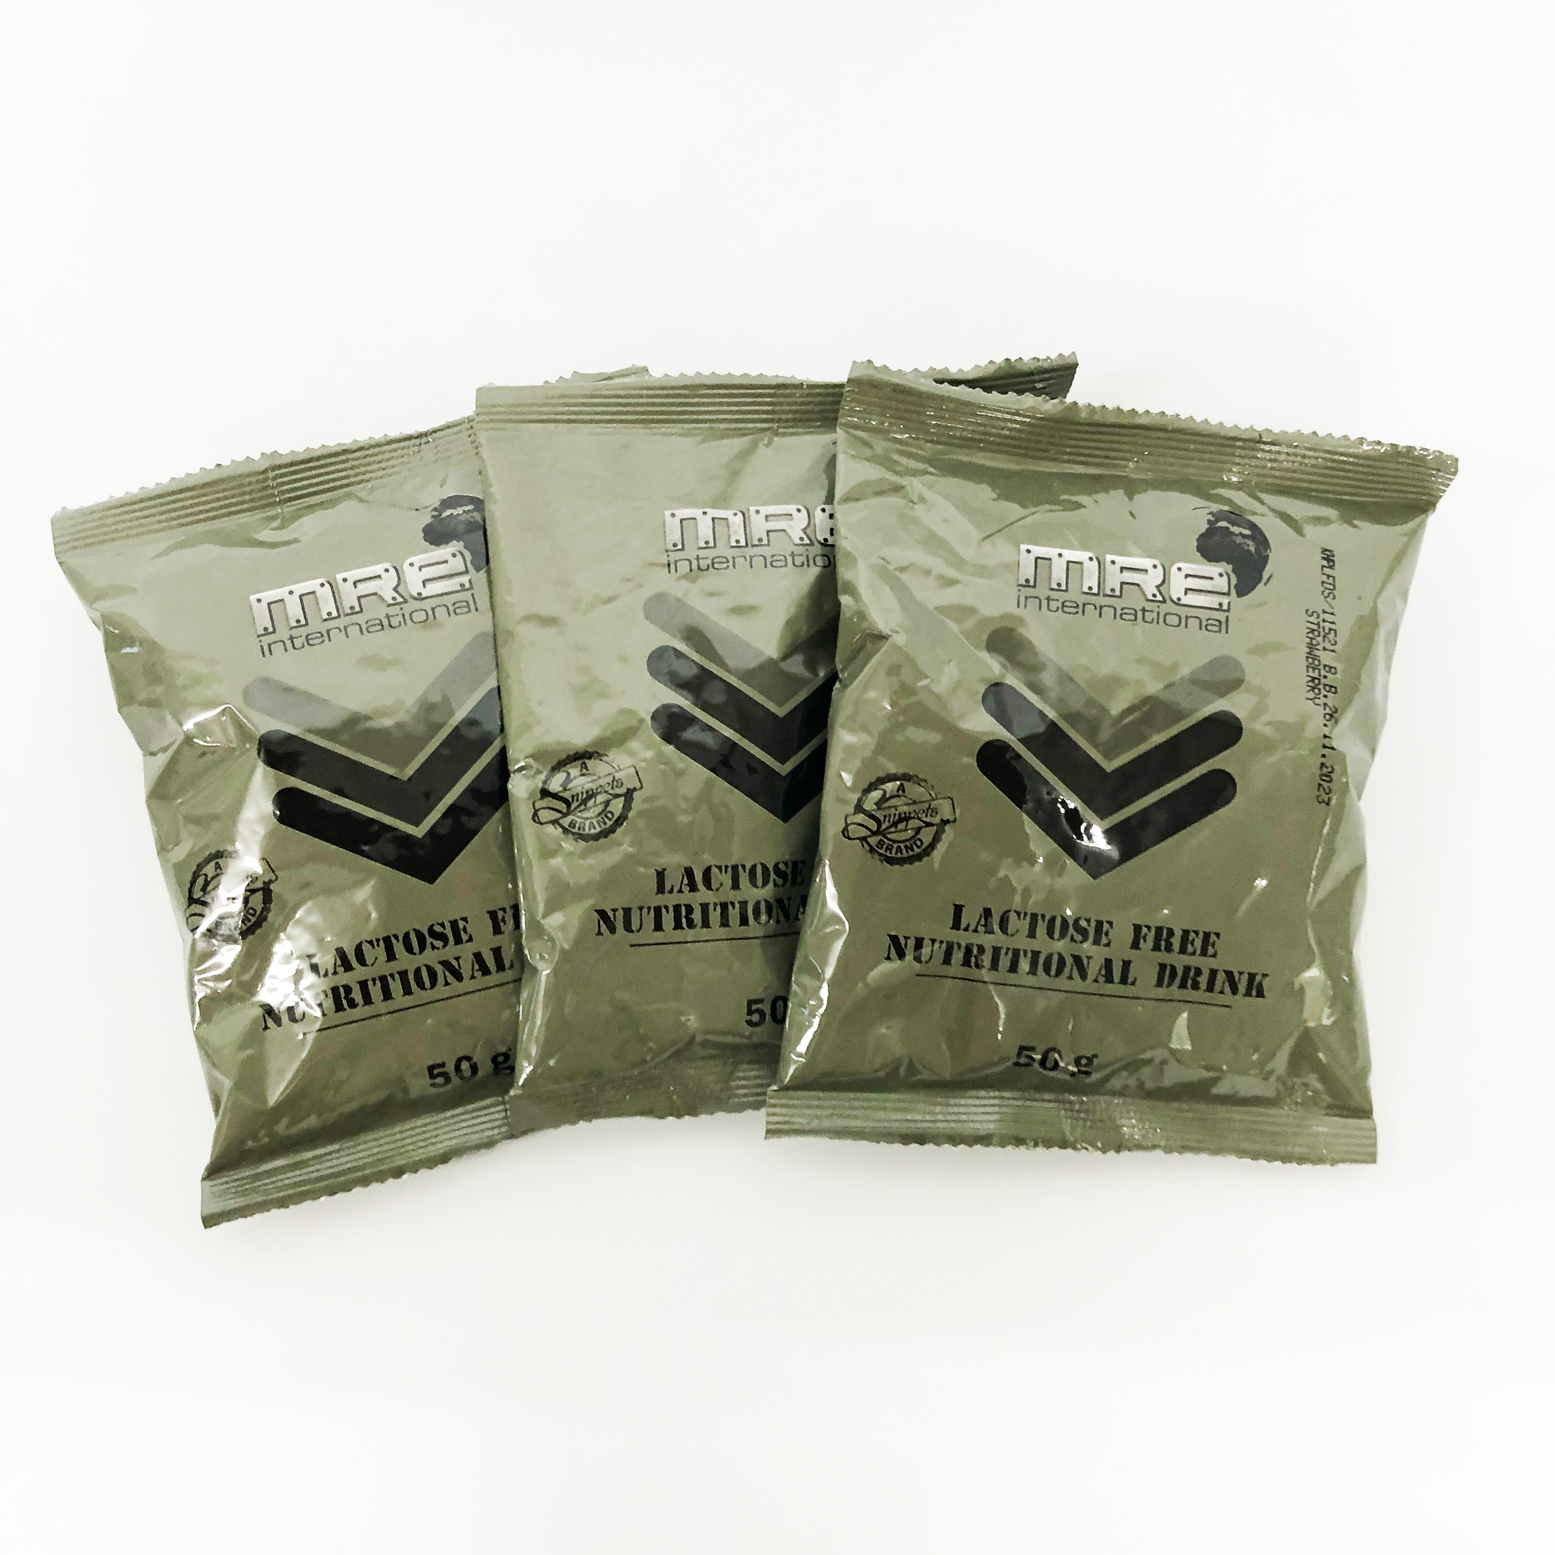 MRE Lactose Free Nutritional Drink ration pack meals ready to eat